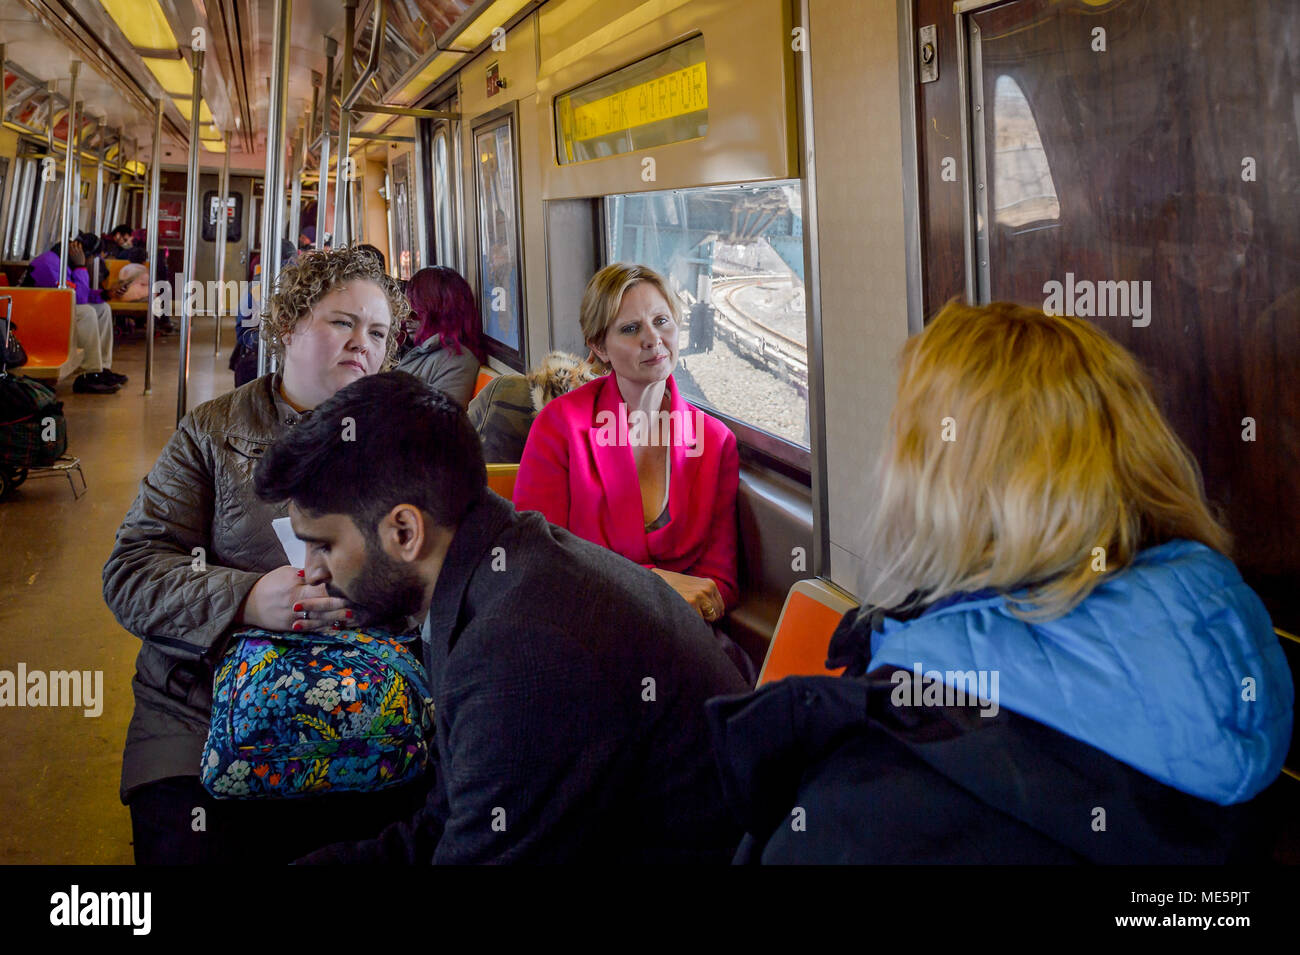 Averne, United States. 20th Apr, 2018. Cynthia Nixon taking the subway to  the Rockaways. Nixon, a lifelong New Yorker, actor, progressive advocate  and candidate running for governor presented her Climate Justice Agenda